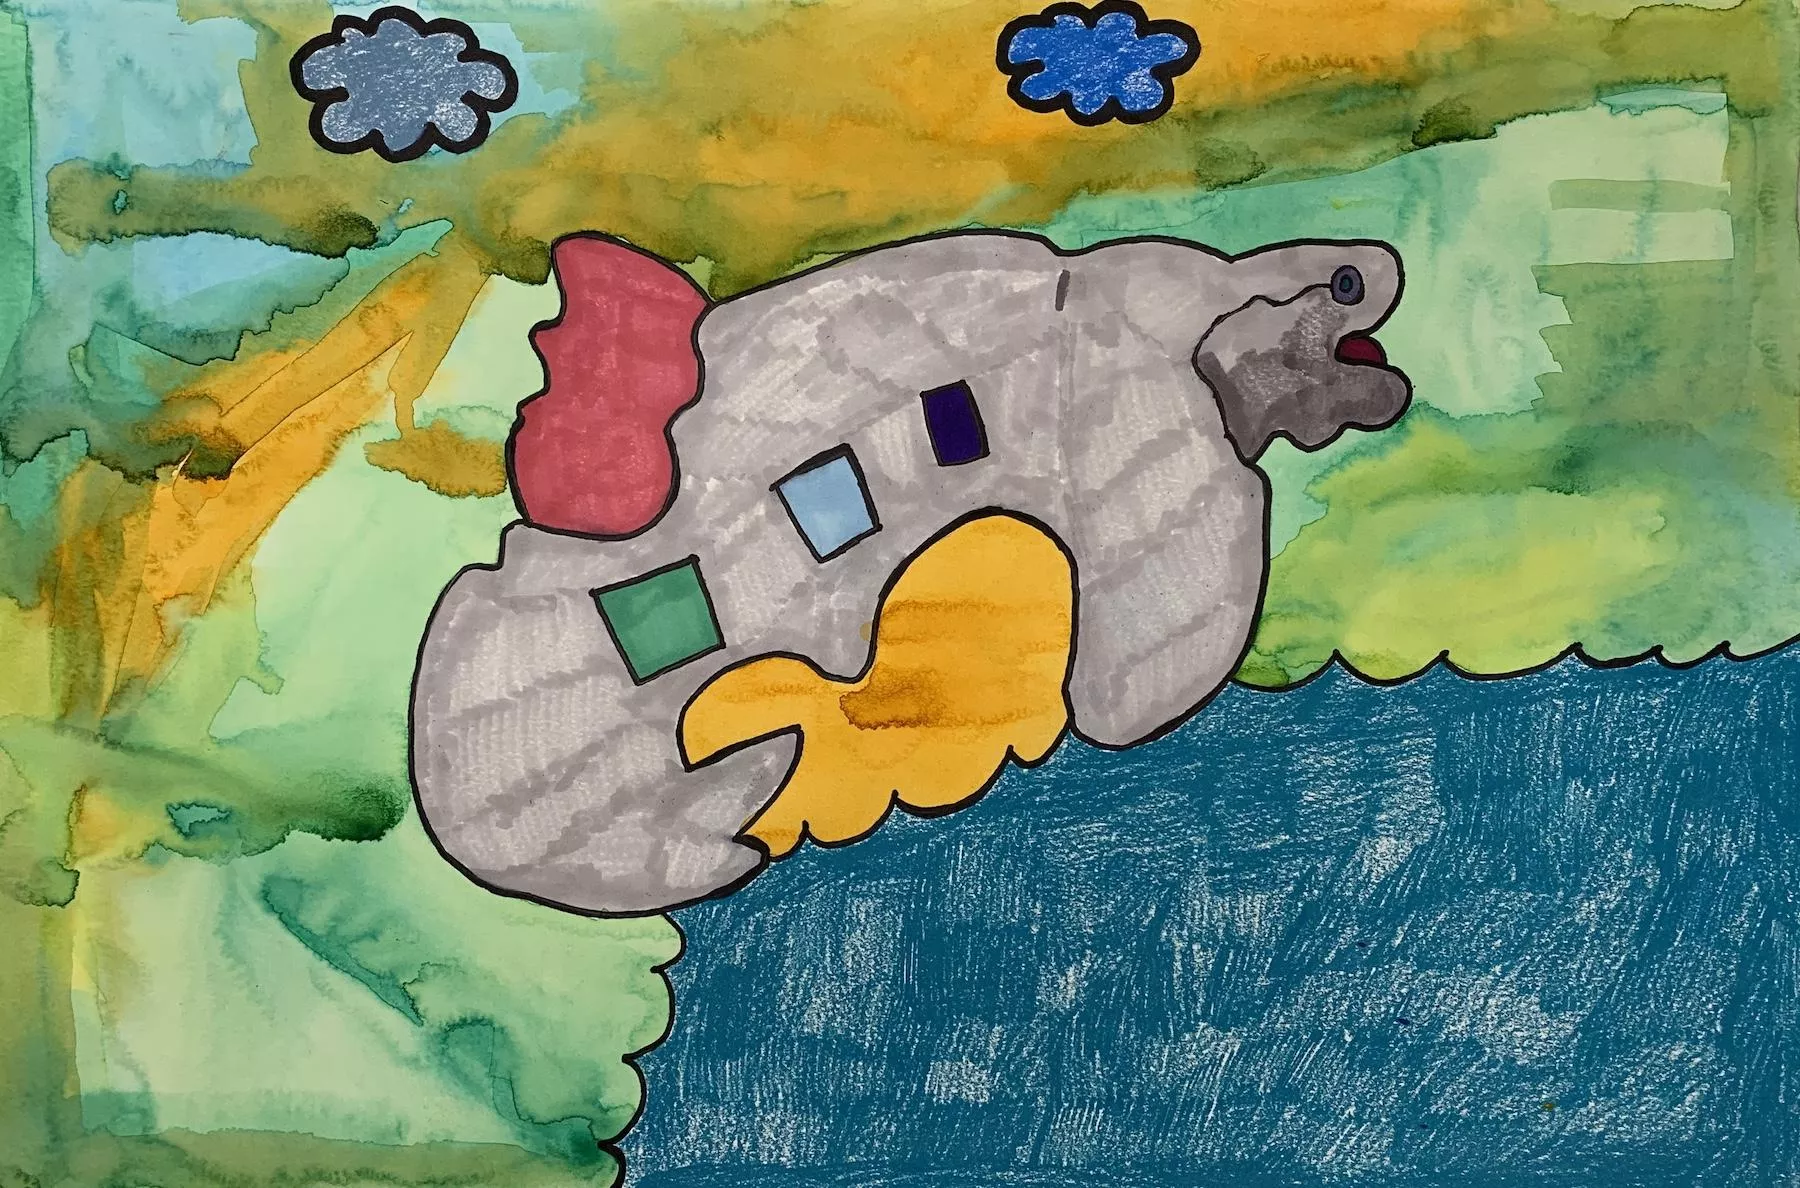 A sky of yellows, greens and blues highlights a gray whale with a red fin as it leaps from a deep blue sea, being left sprawled out across the center of the picture plane, almost coming into contact with the two blue clouds at the top of the piece.